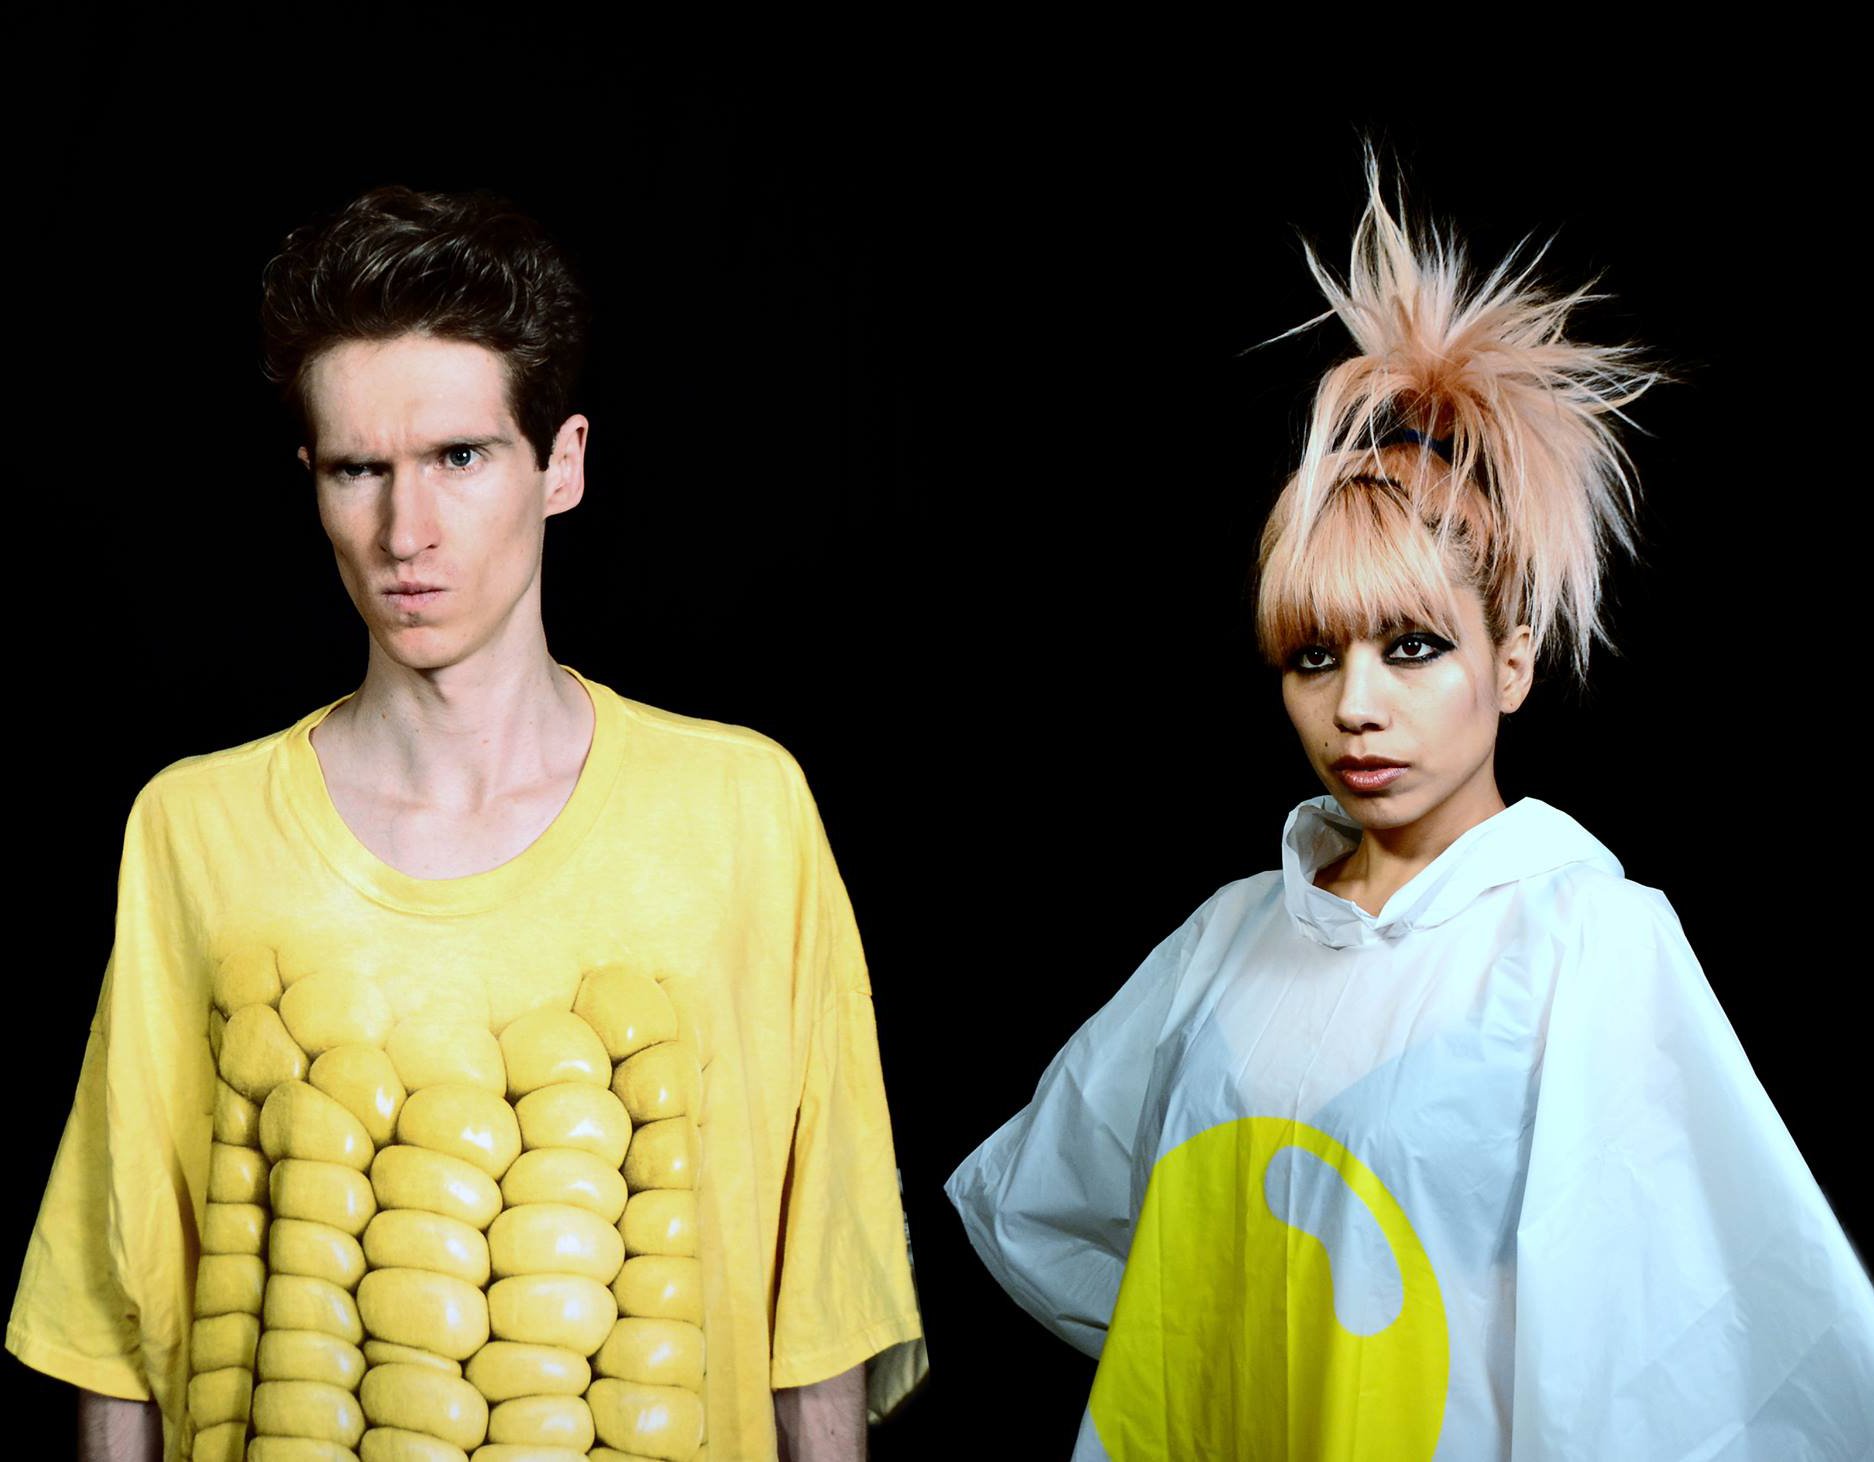 KNOWER music, videos, stats, and photos